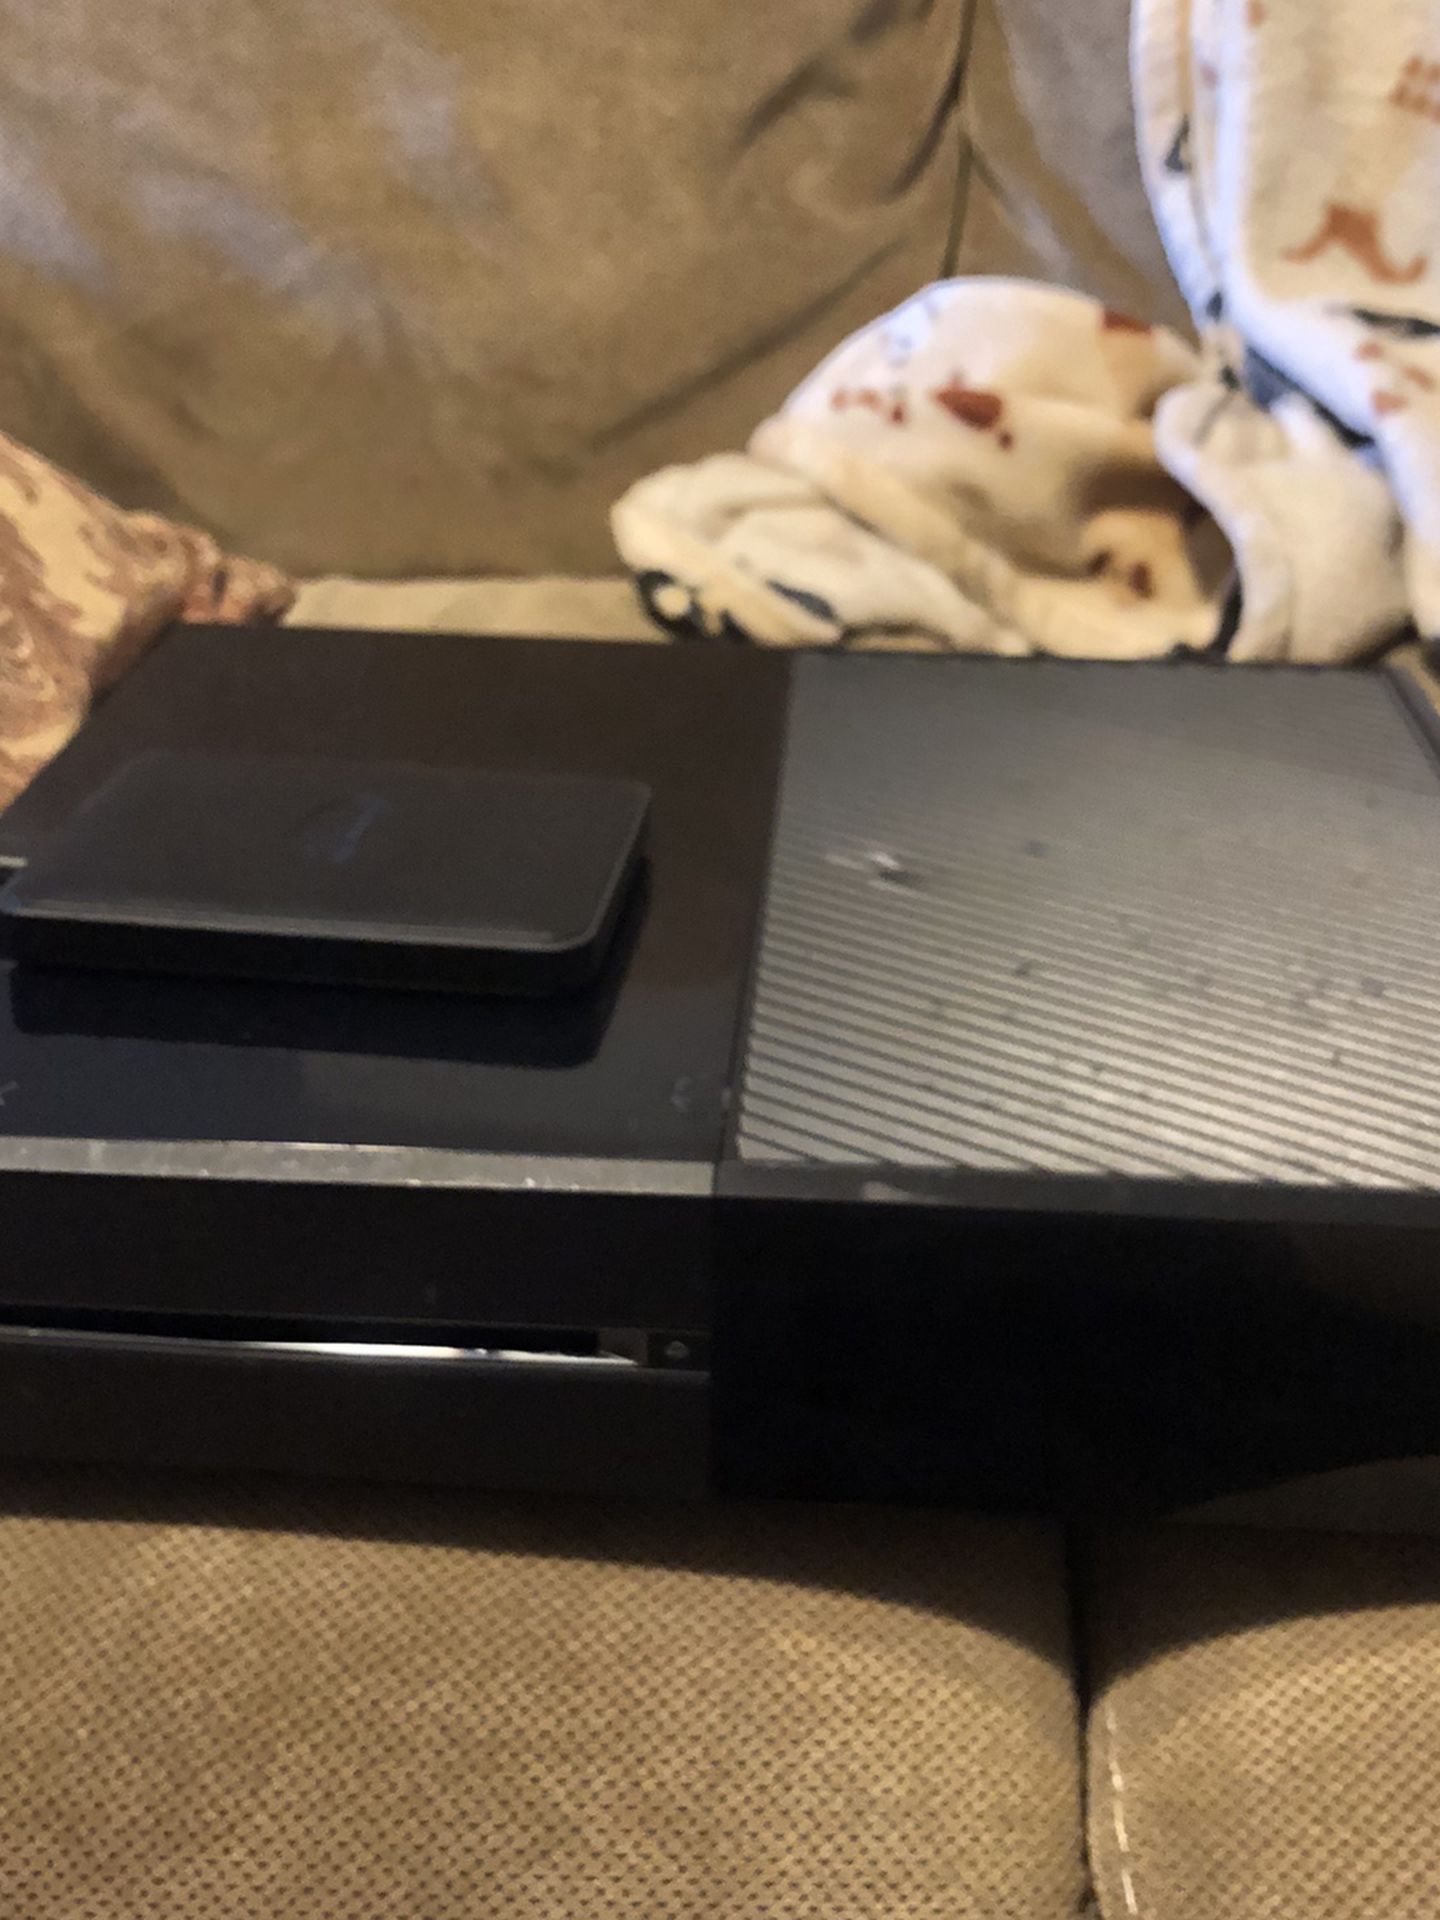 Xbox one 1tb hard drive 1 working controller and all cords, with 2 working games